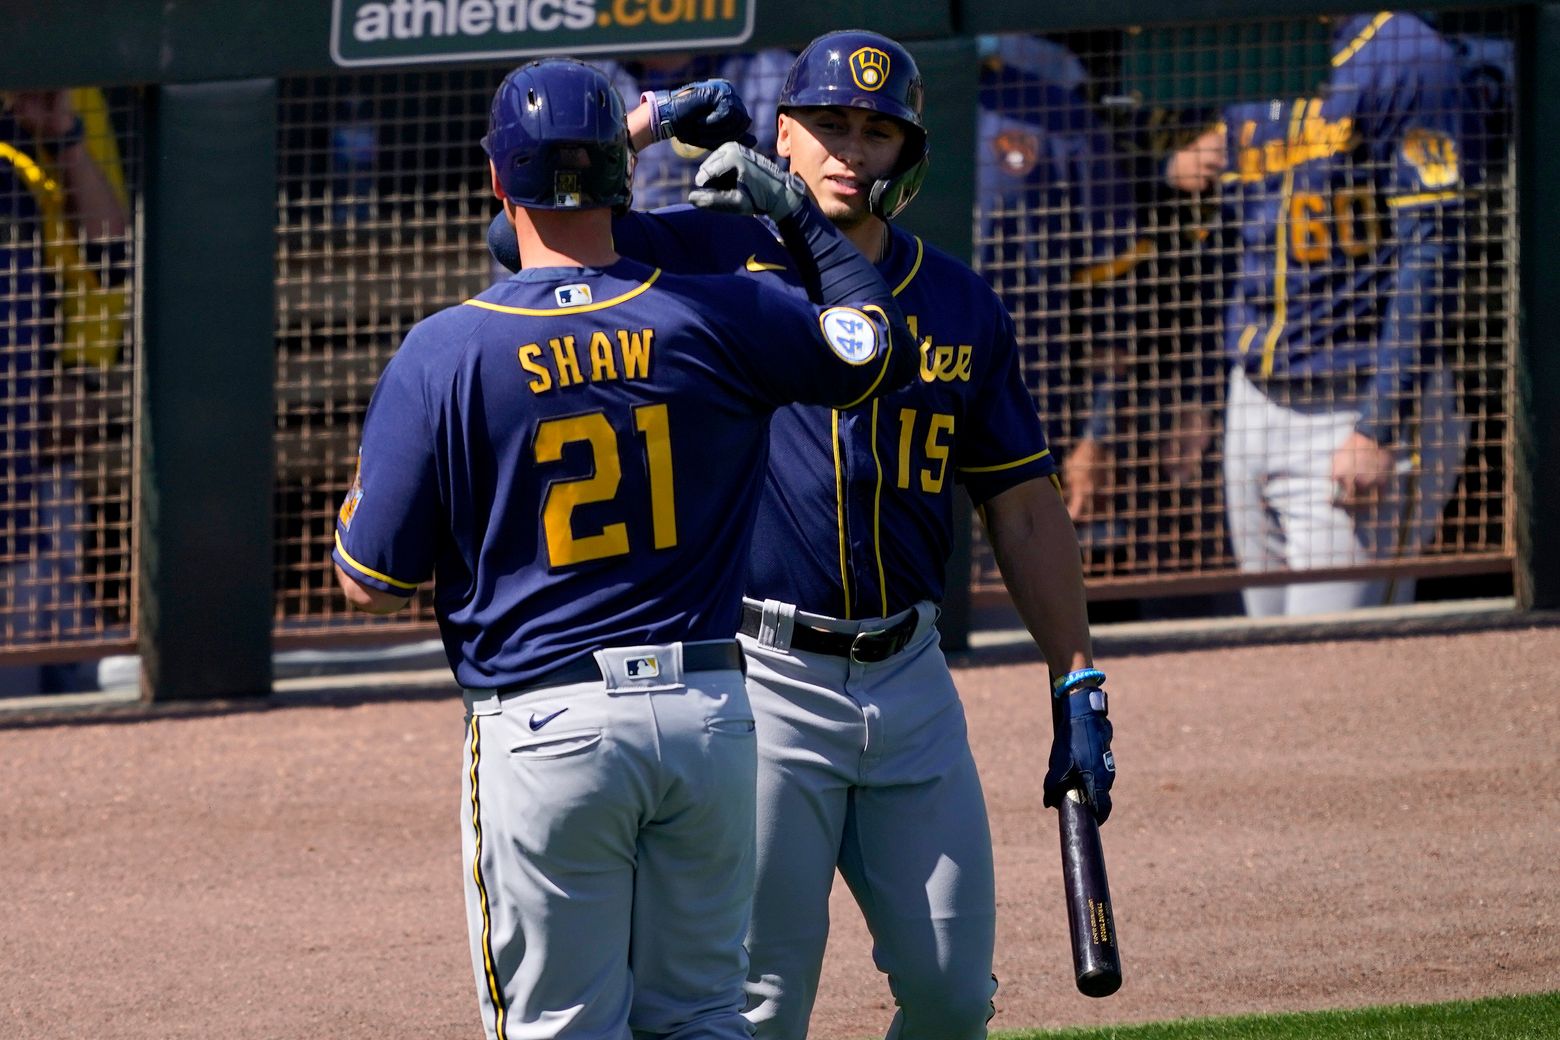 Travis Shaw returns to Brewers with minor-league deal